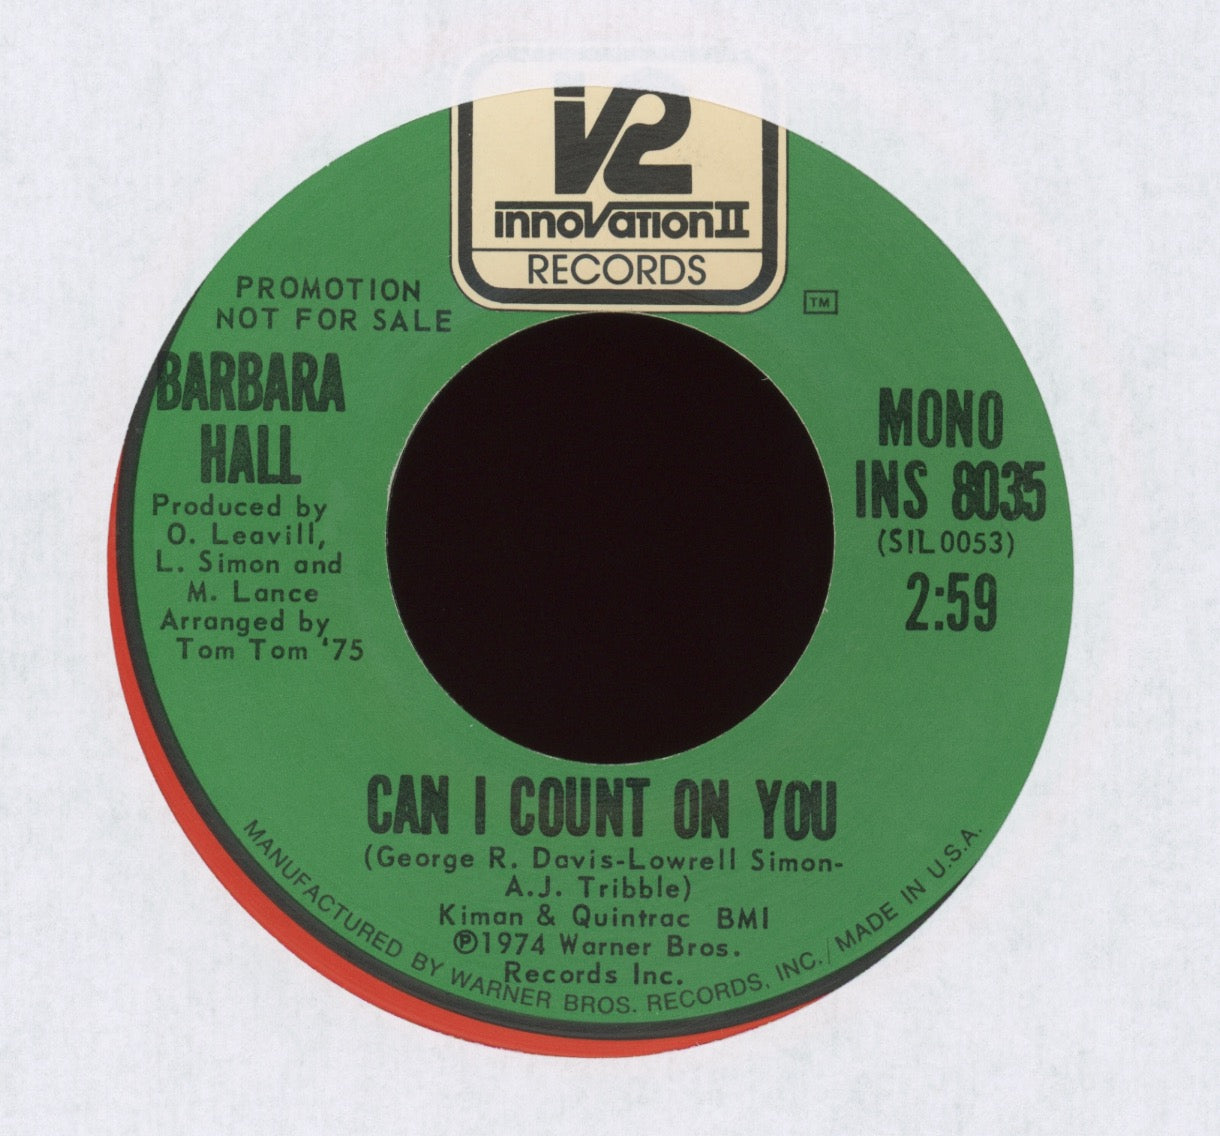 Barbara Hall - Can I Count On You on Innovation II Promo